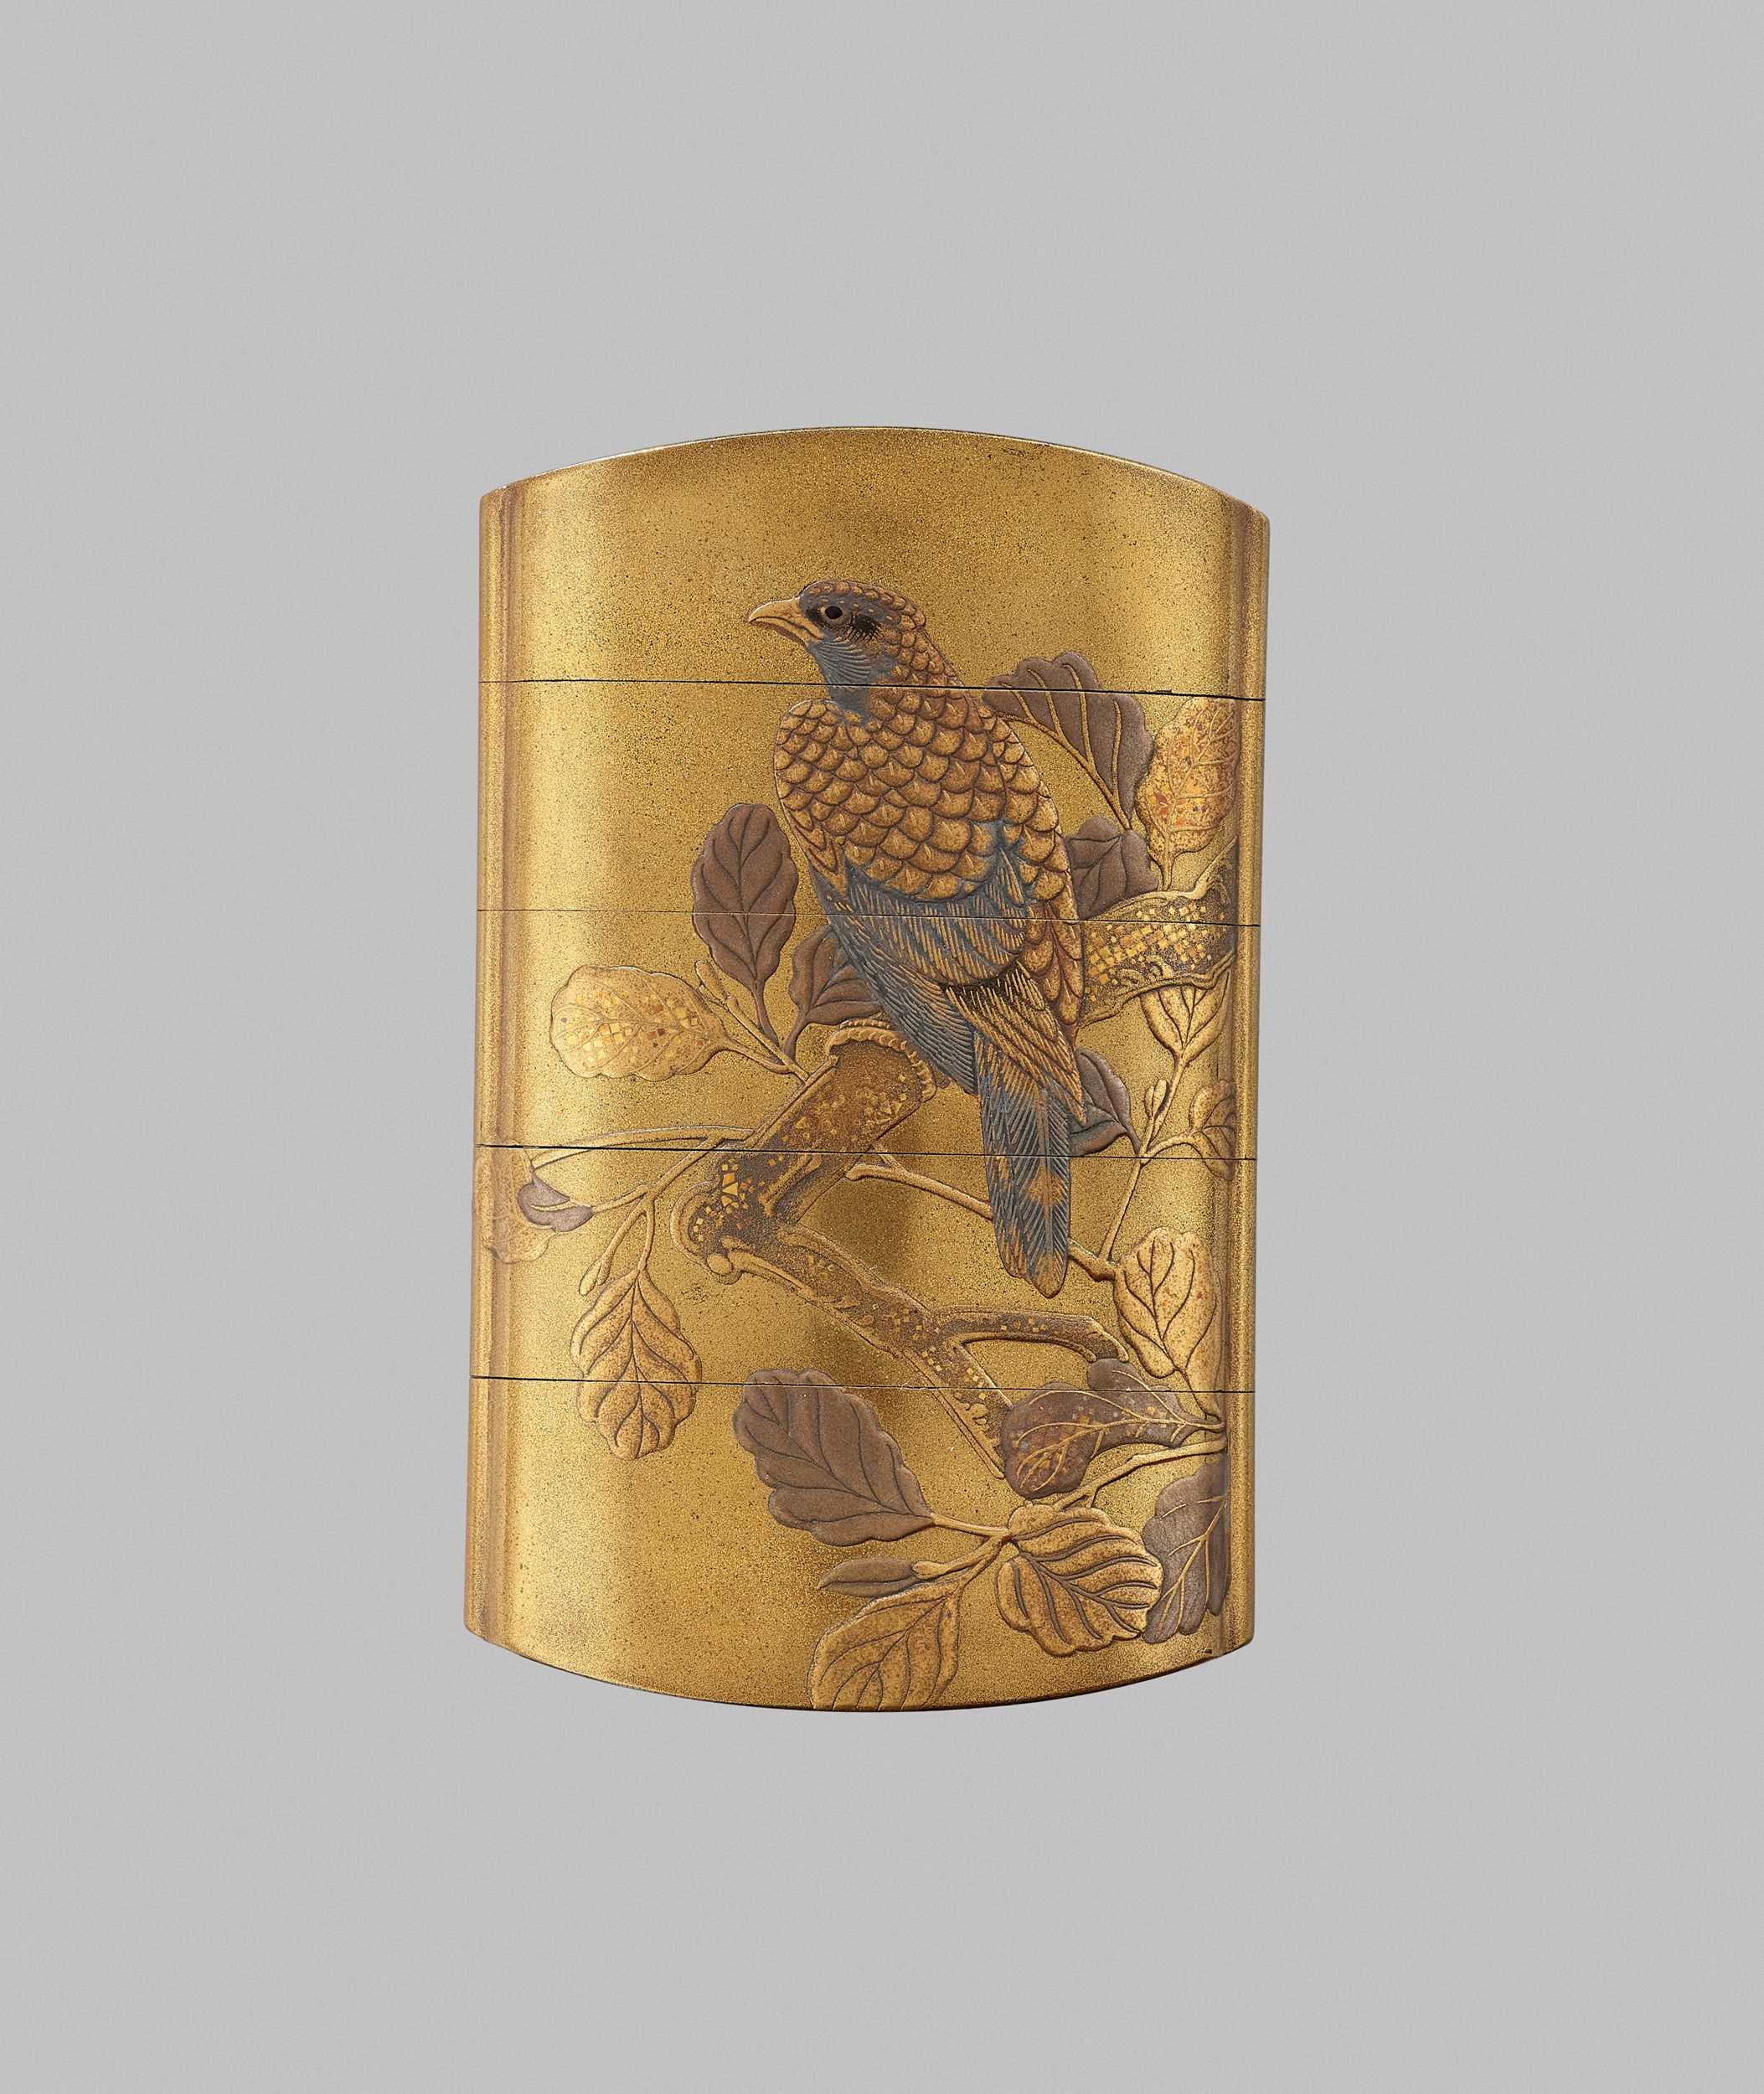 Lot 617 - YOYUSAI: A FINE GOLD LACQUER FOUR-CASE INRO WITH A HAWK AND TWO HERONS